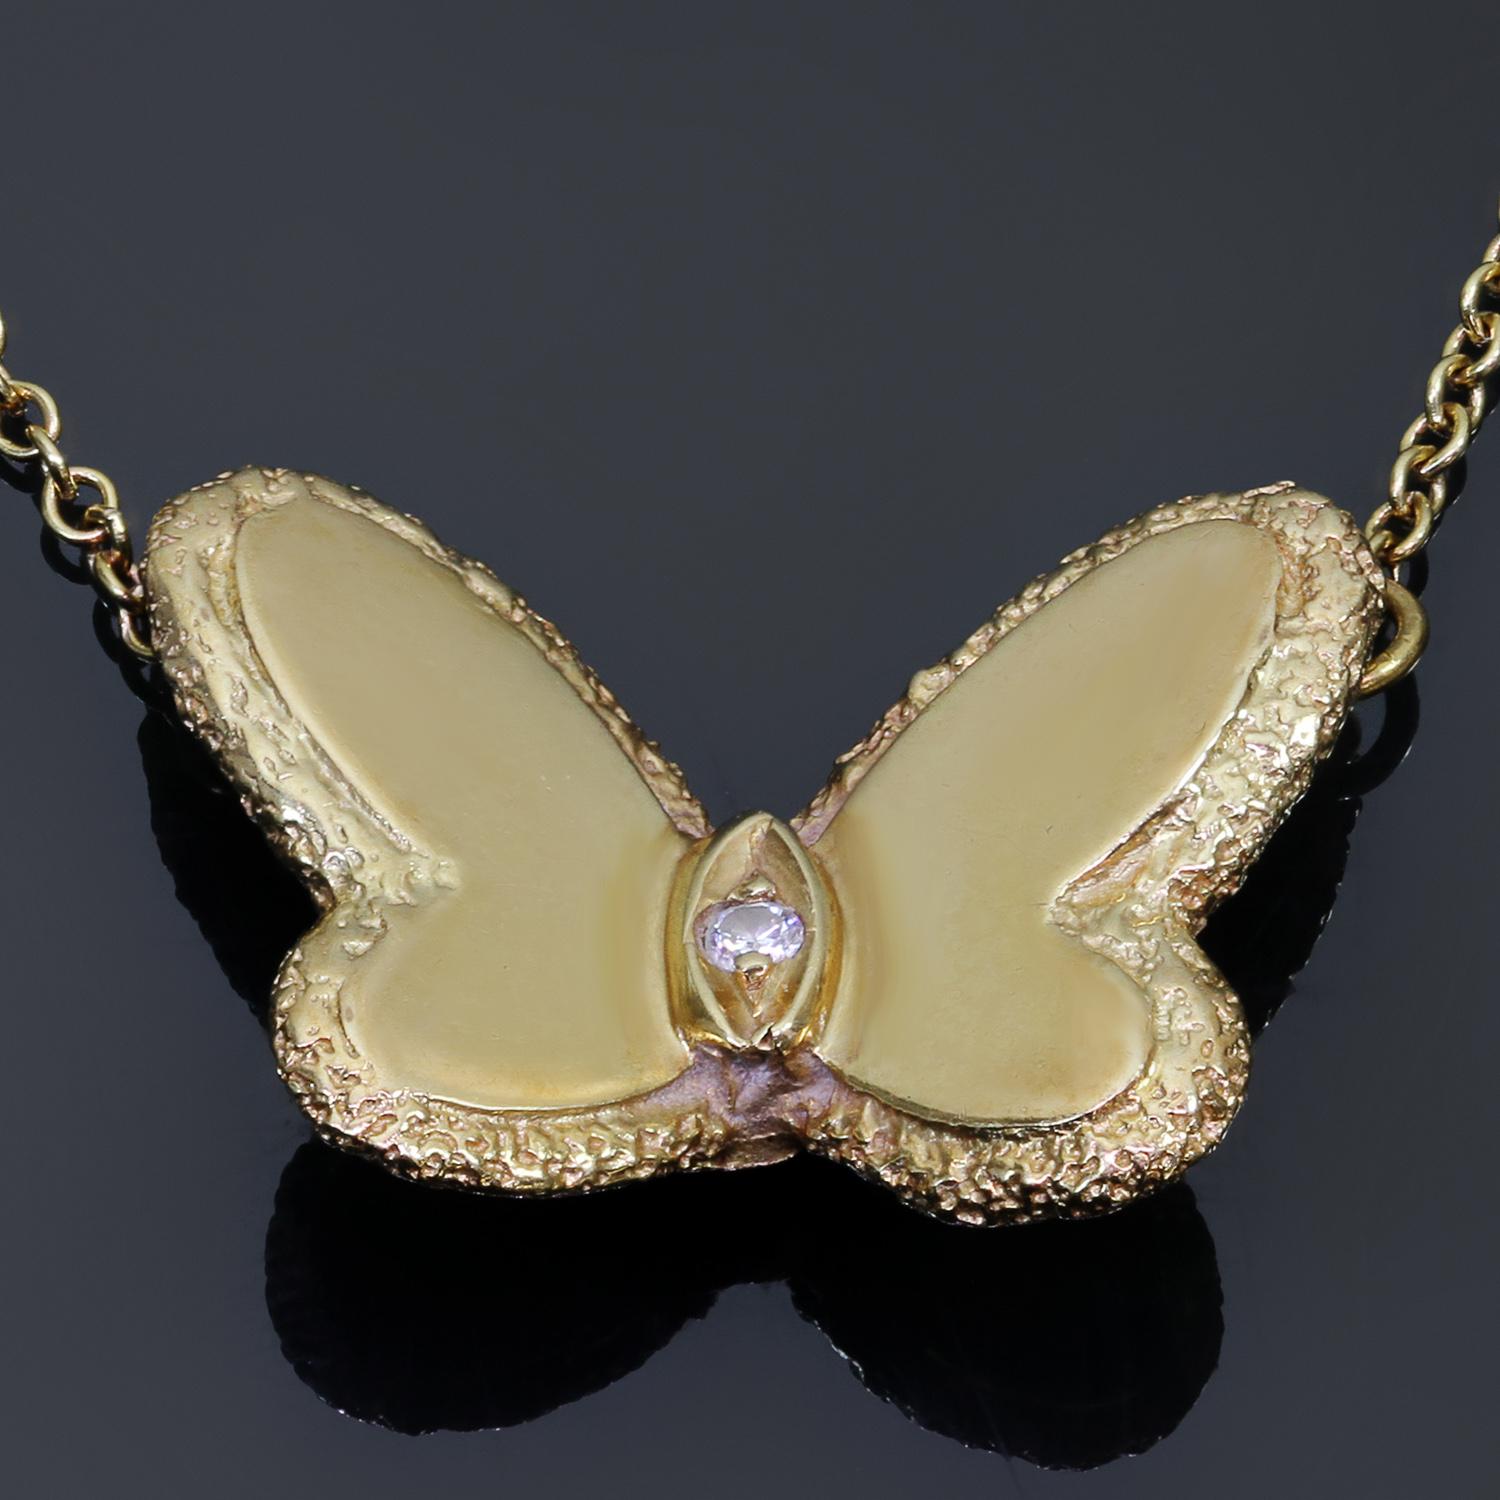 This rare and collectible vintage Van Cleef & Arpels necklace from the iconic Flying Beauties collection is crafted in textured 18k yellow gold and accented a solitaire brilliant-cut diamond of an estimated 0.03 carats. Made in France circa 1970s. 